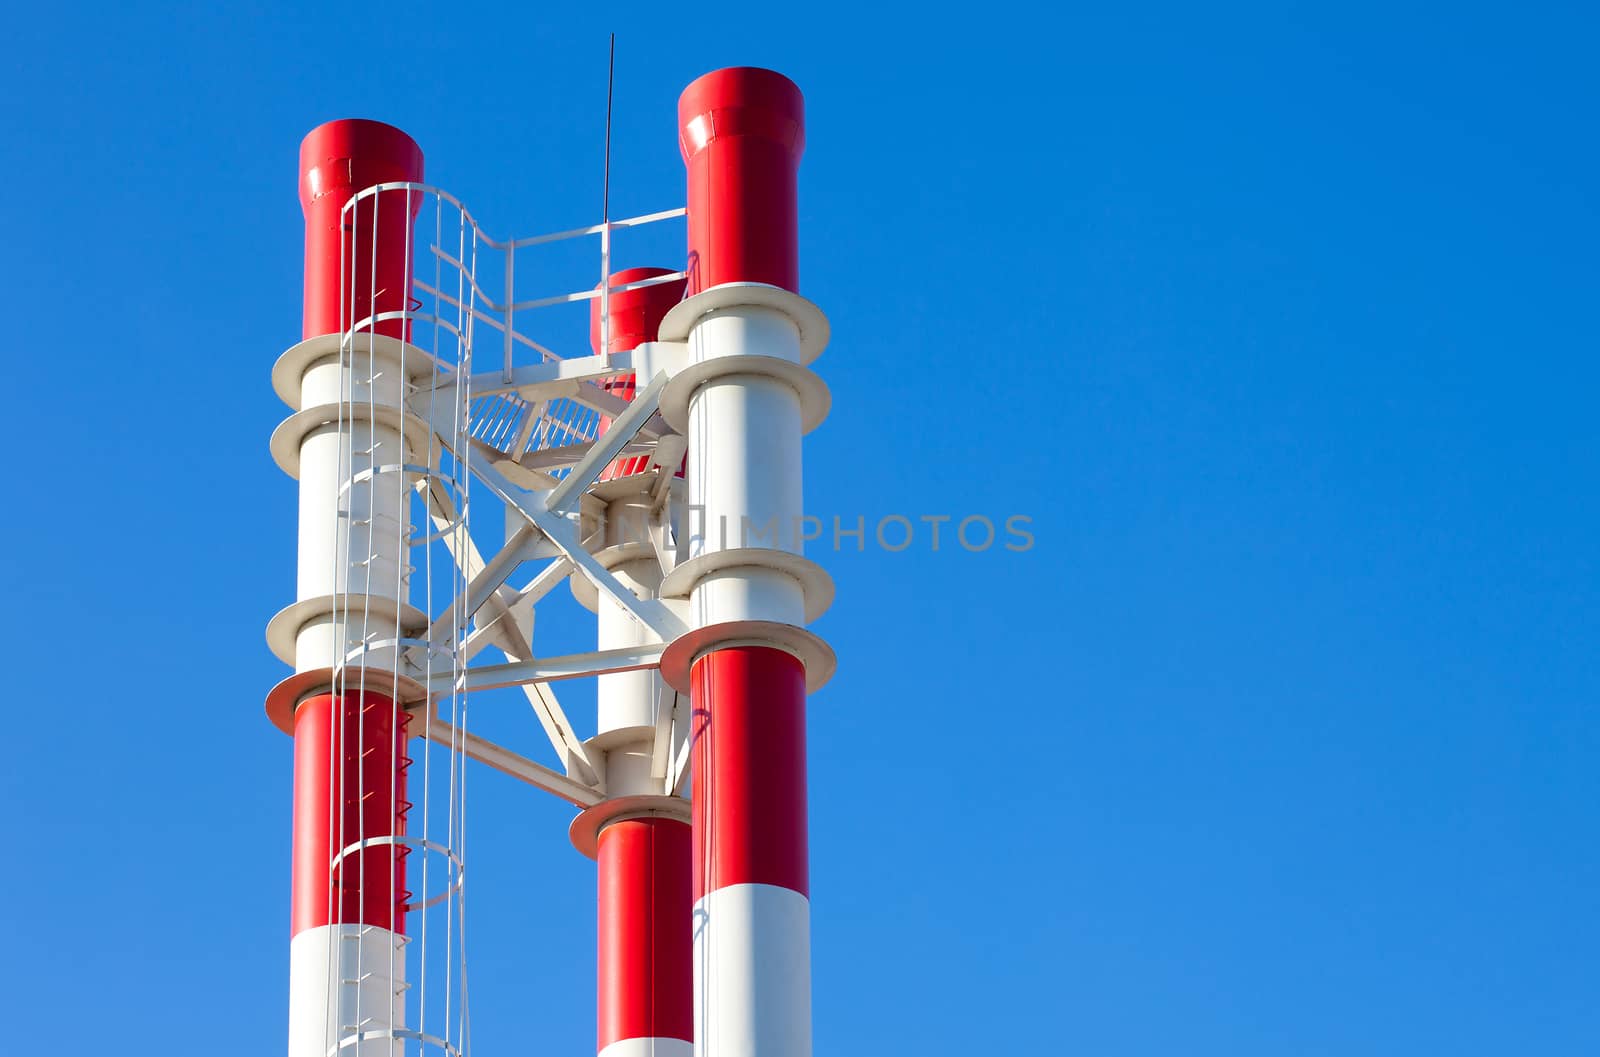 three red-and-white chimneys against the blue sky